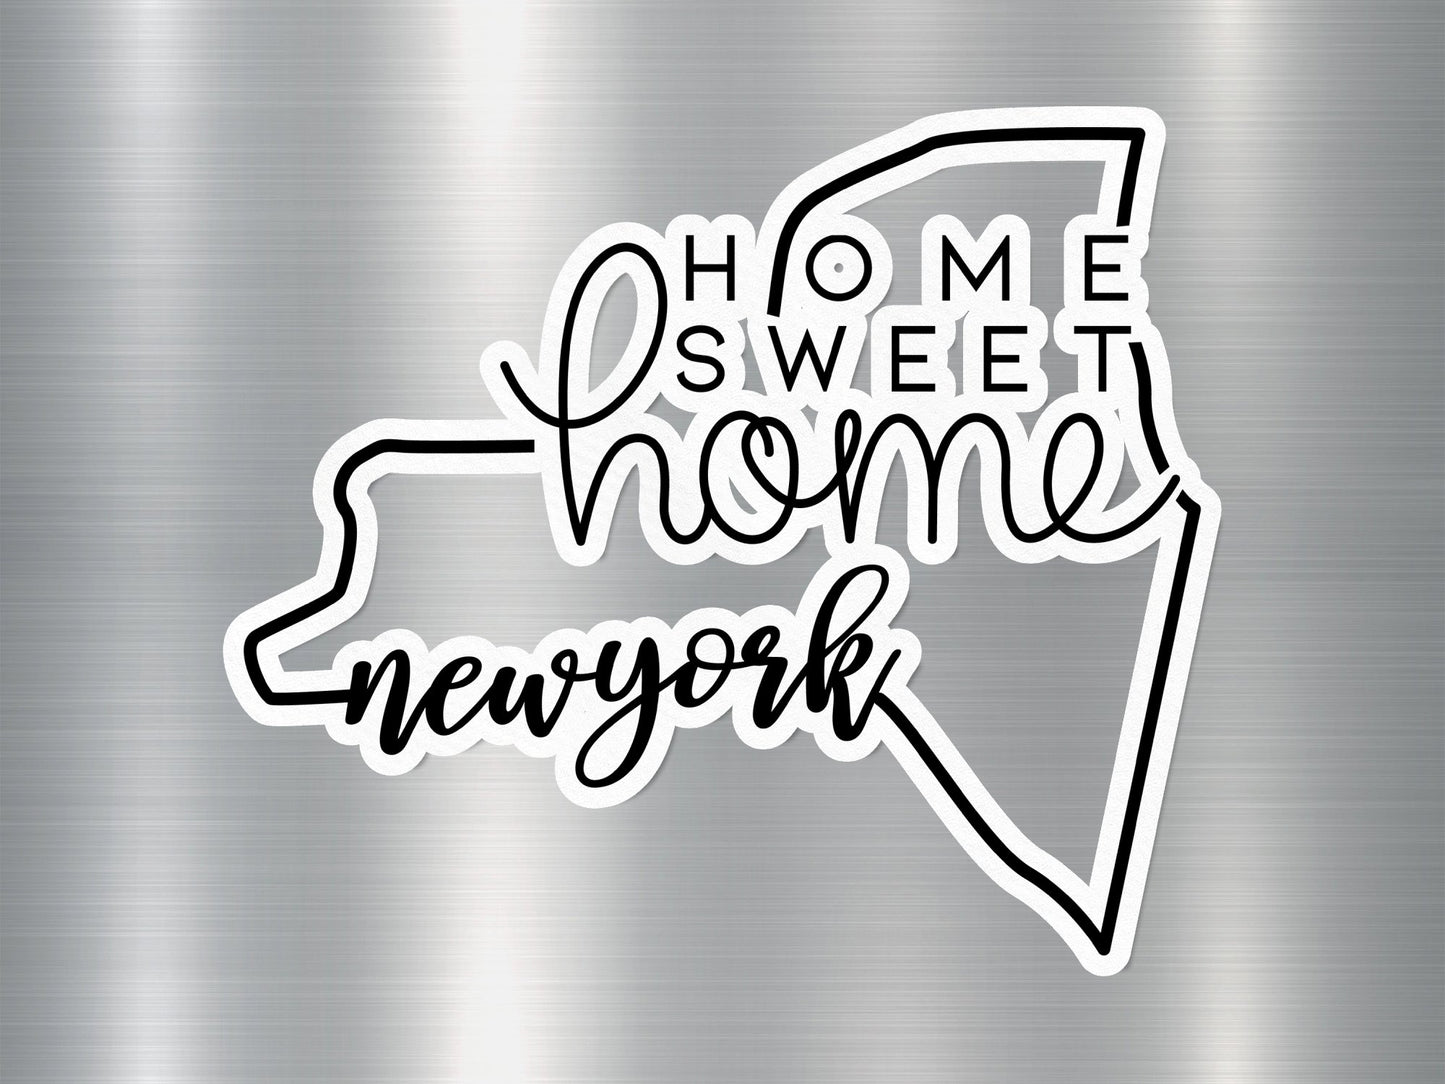 Home Sweet Home New York State Sticker